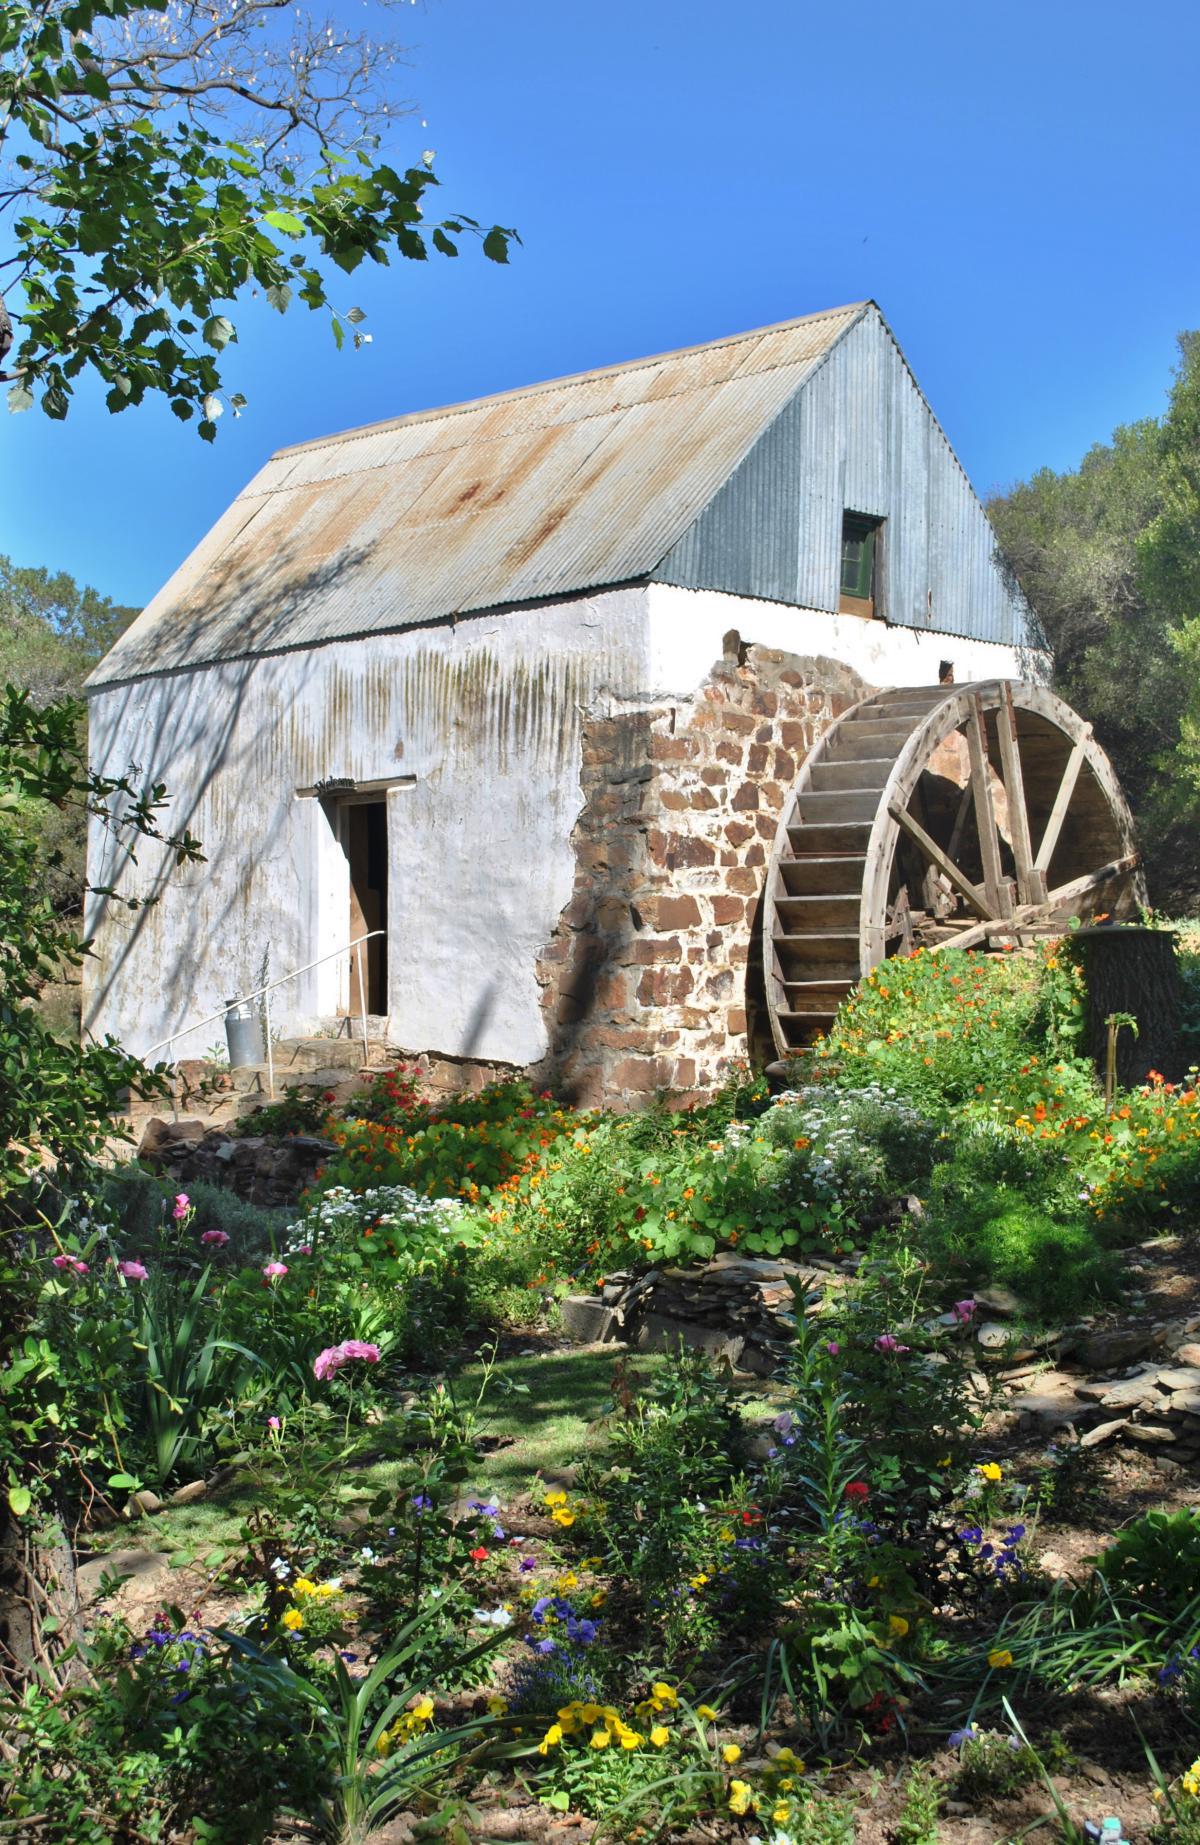 The Old Mill in McGregor